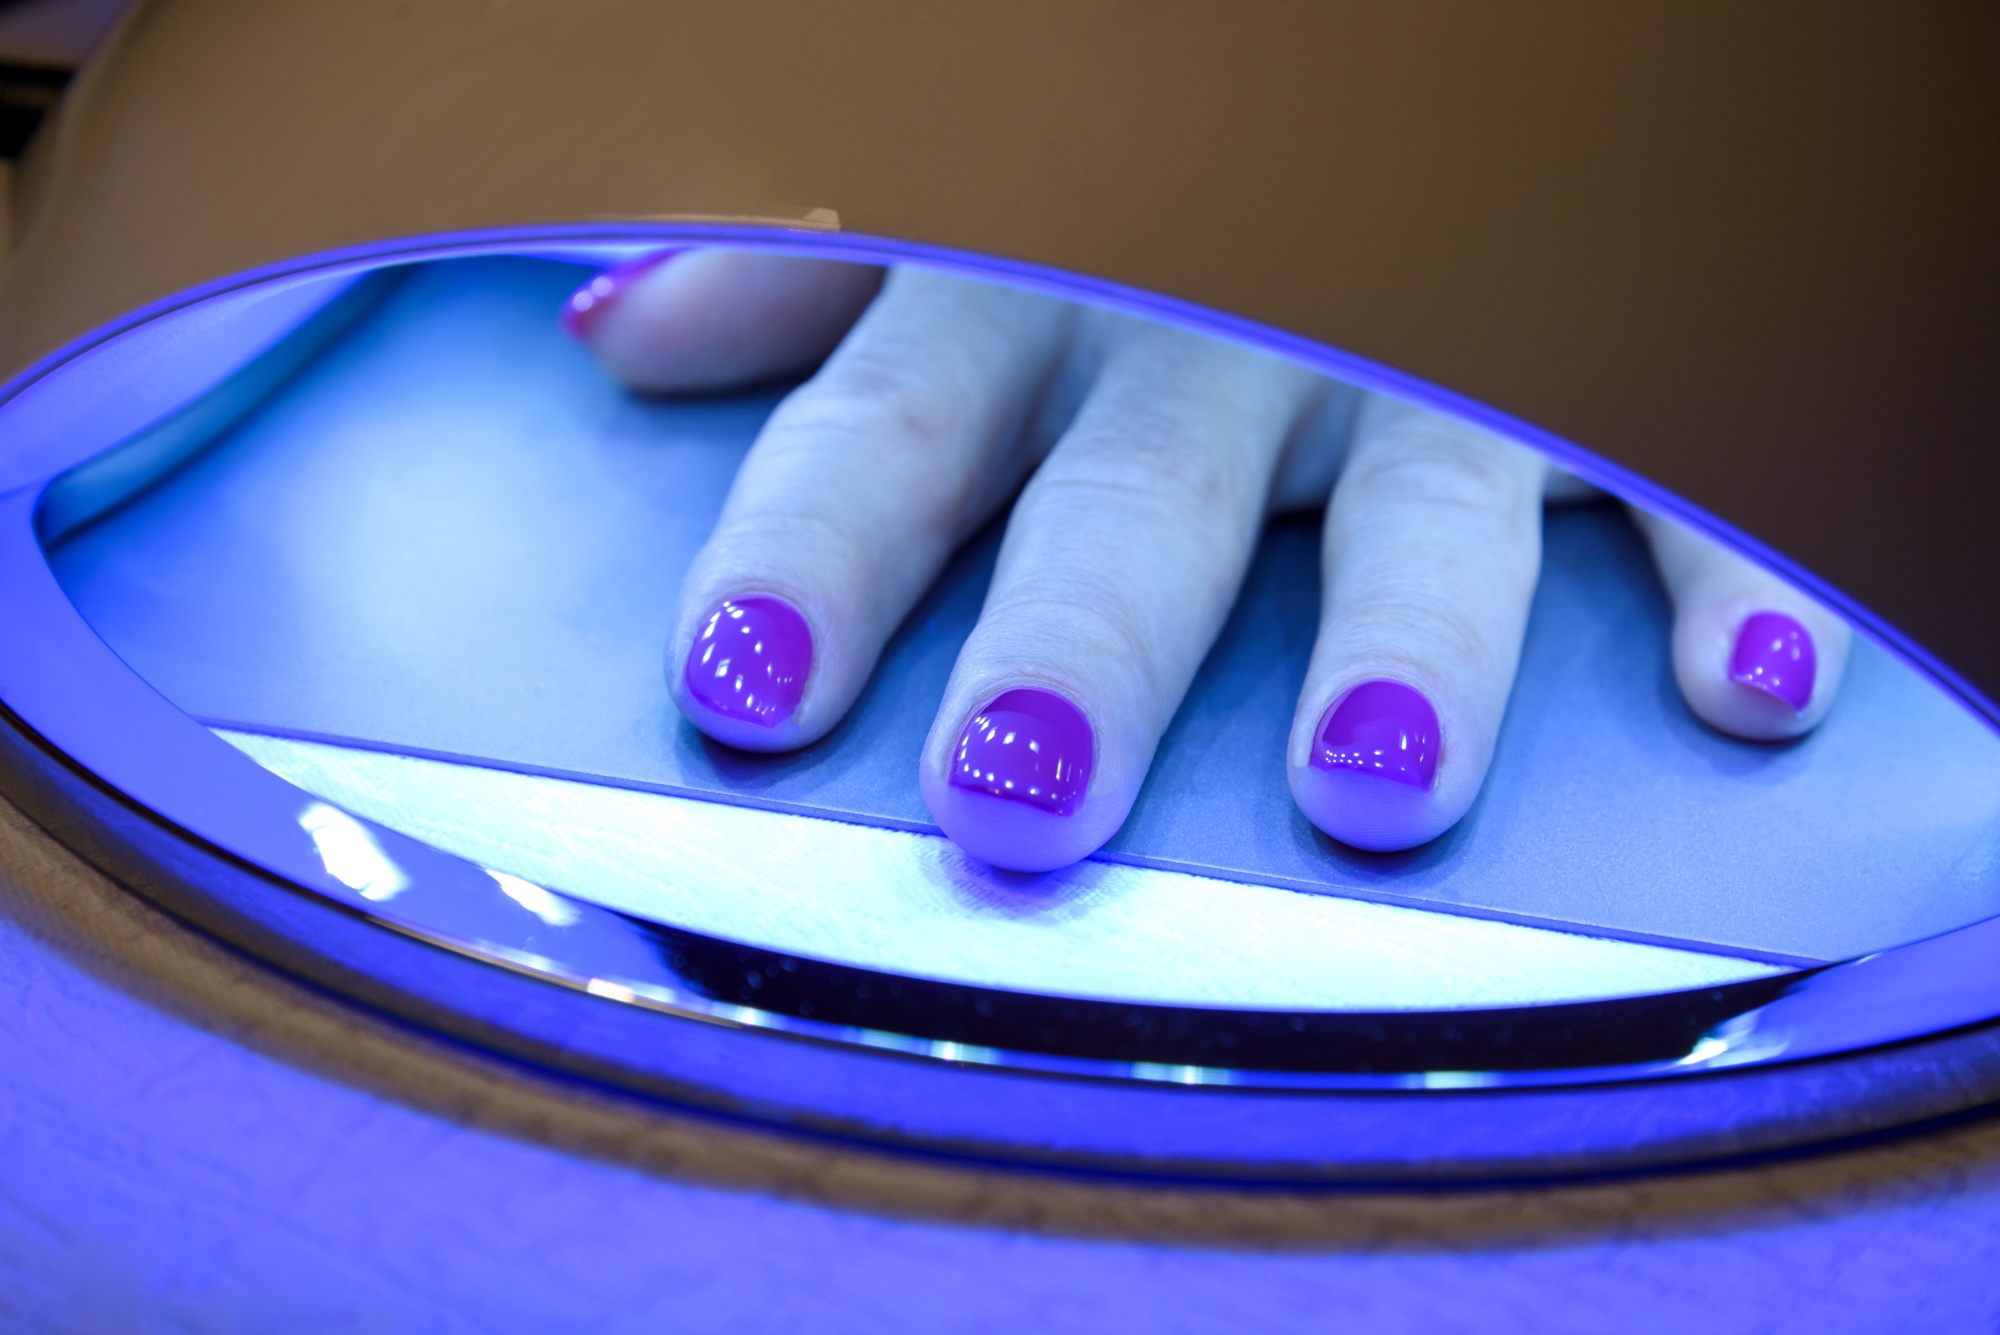 Are Gel Manicures Safe? Study Finds UV Drying Lamps May Damage DNA